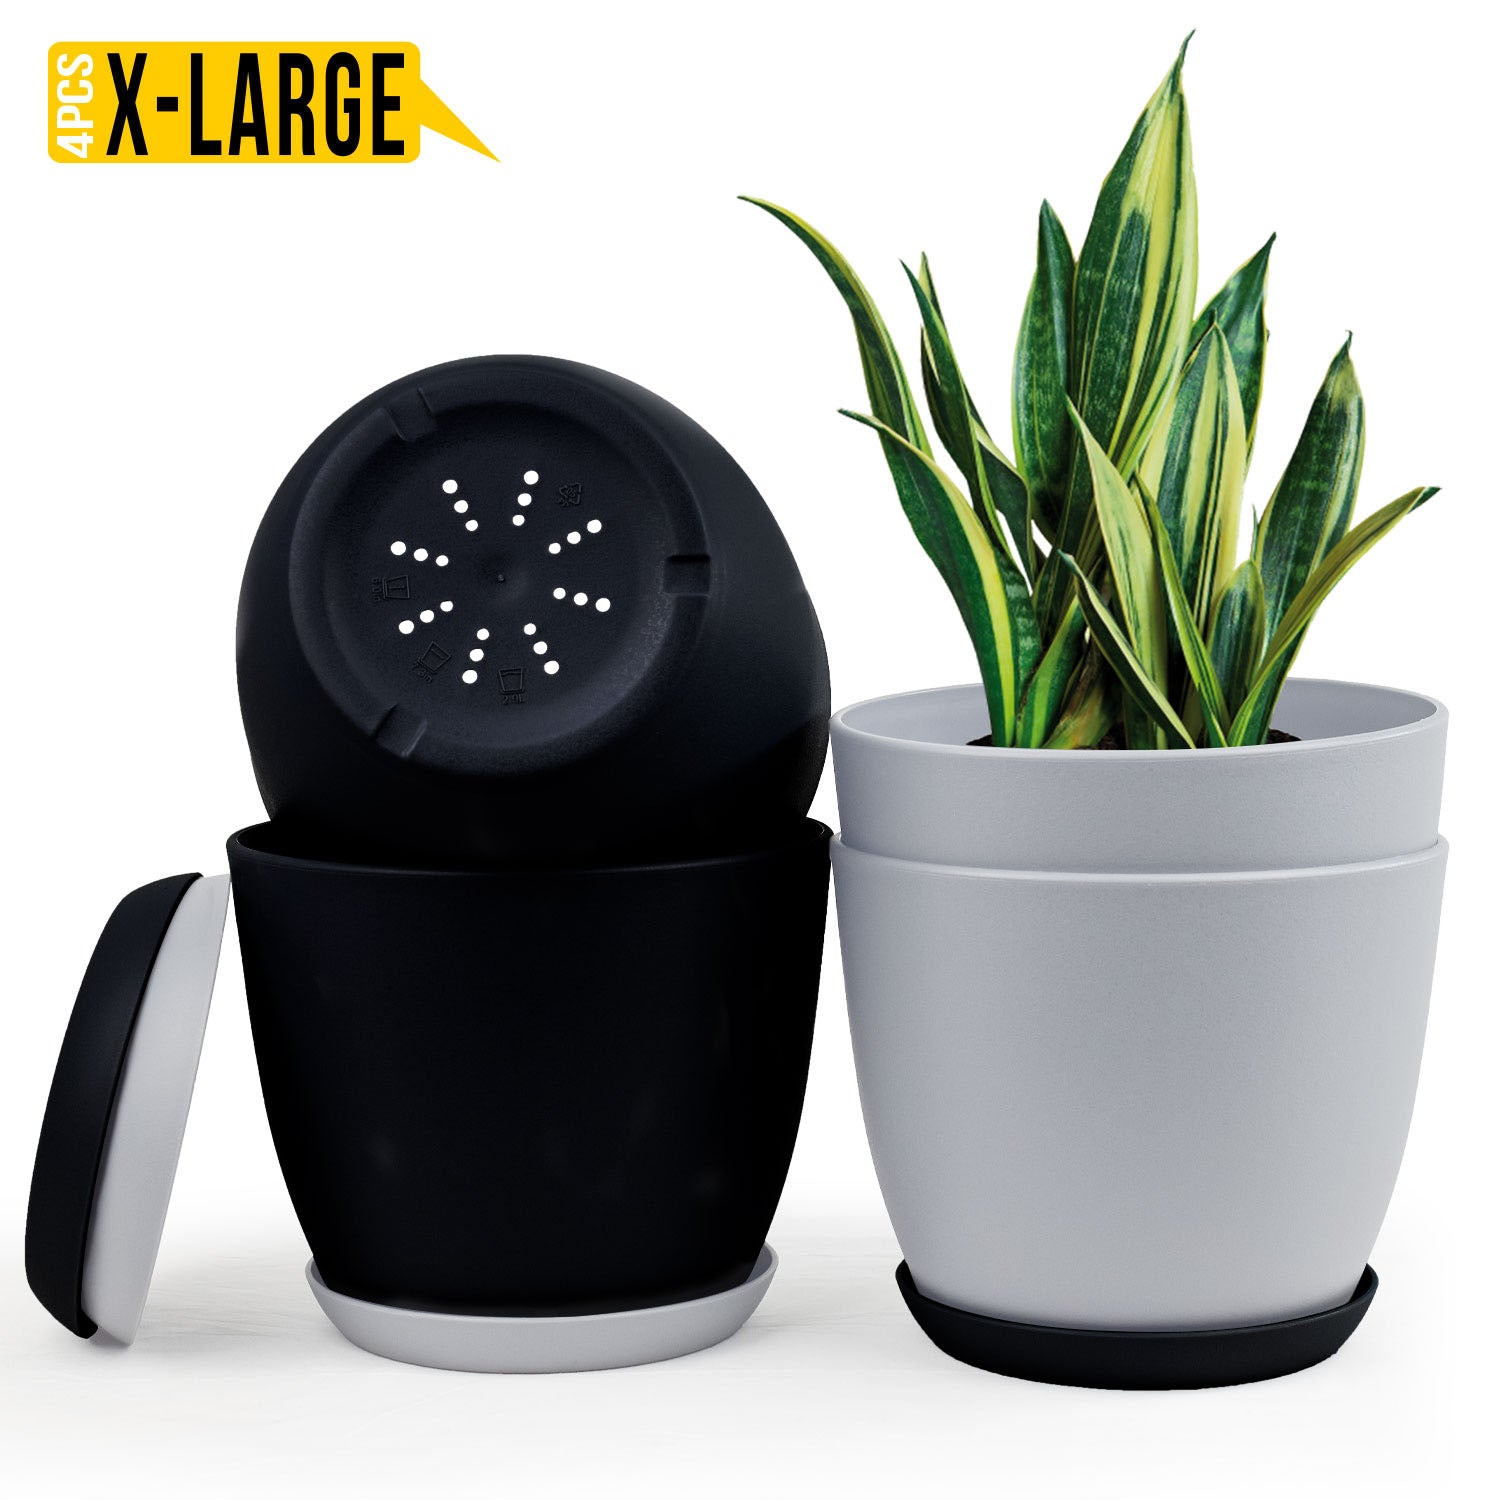 Revitalize Your Space with Fast Forward Extra Large Plant Pots: Two Vibrant Colors, Drainage, Ideal for Indoor Planters - Explore Multi-Packs for Plastic Planters, Cactus, and Succulents Decor Fast Forward